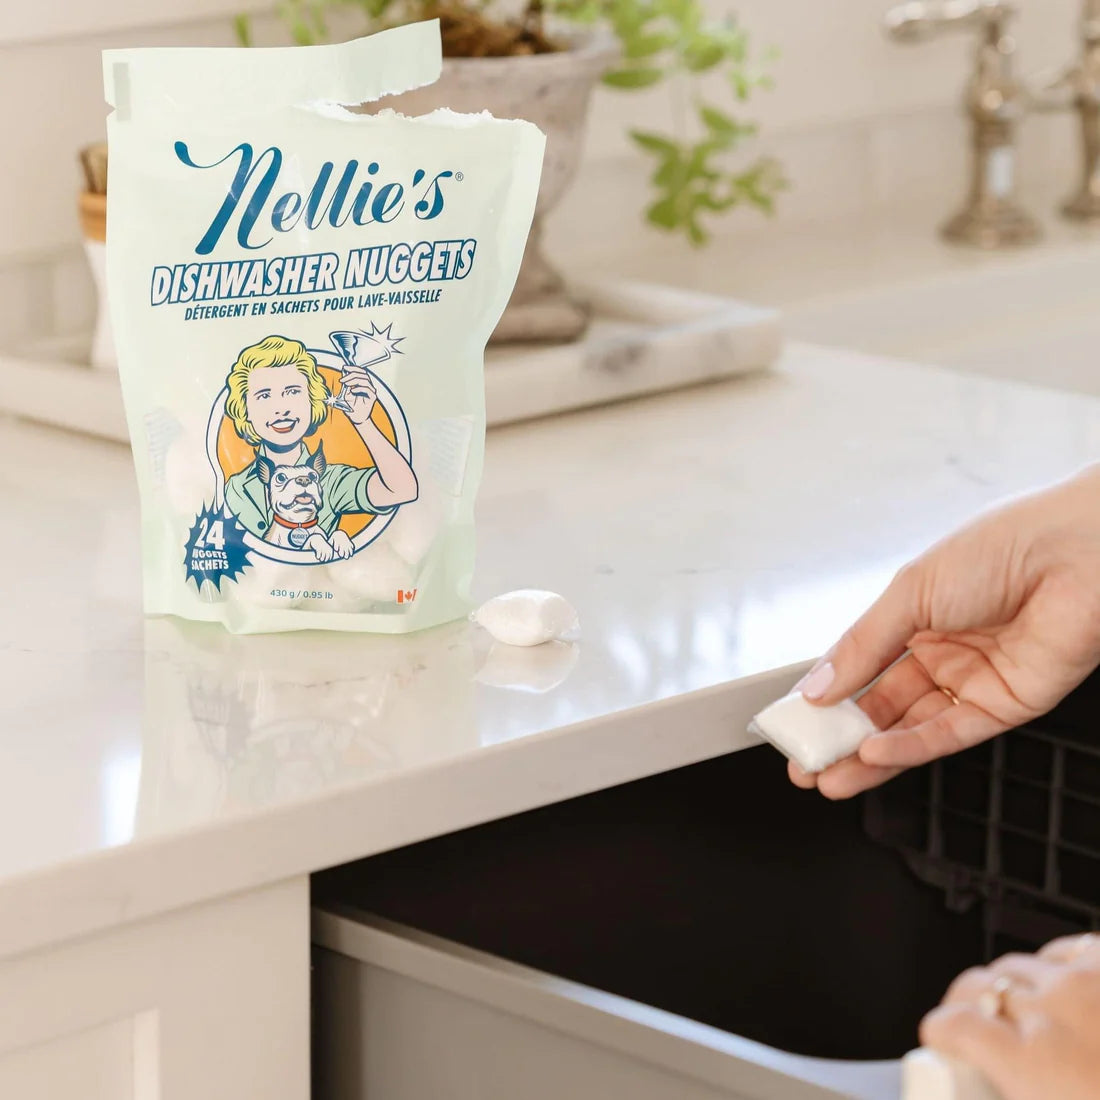 Nellie's - Automatic Dishwasher Nuggets